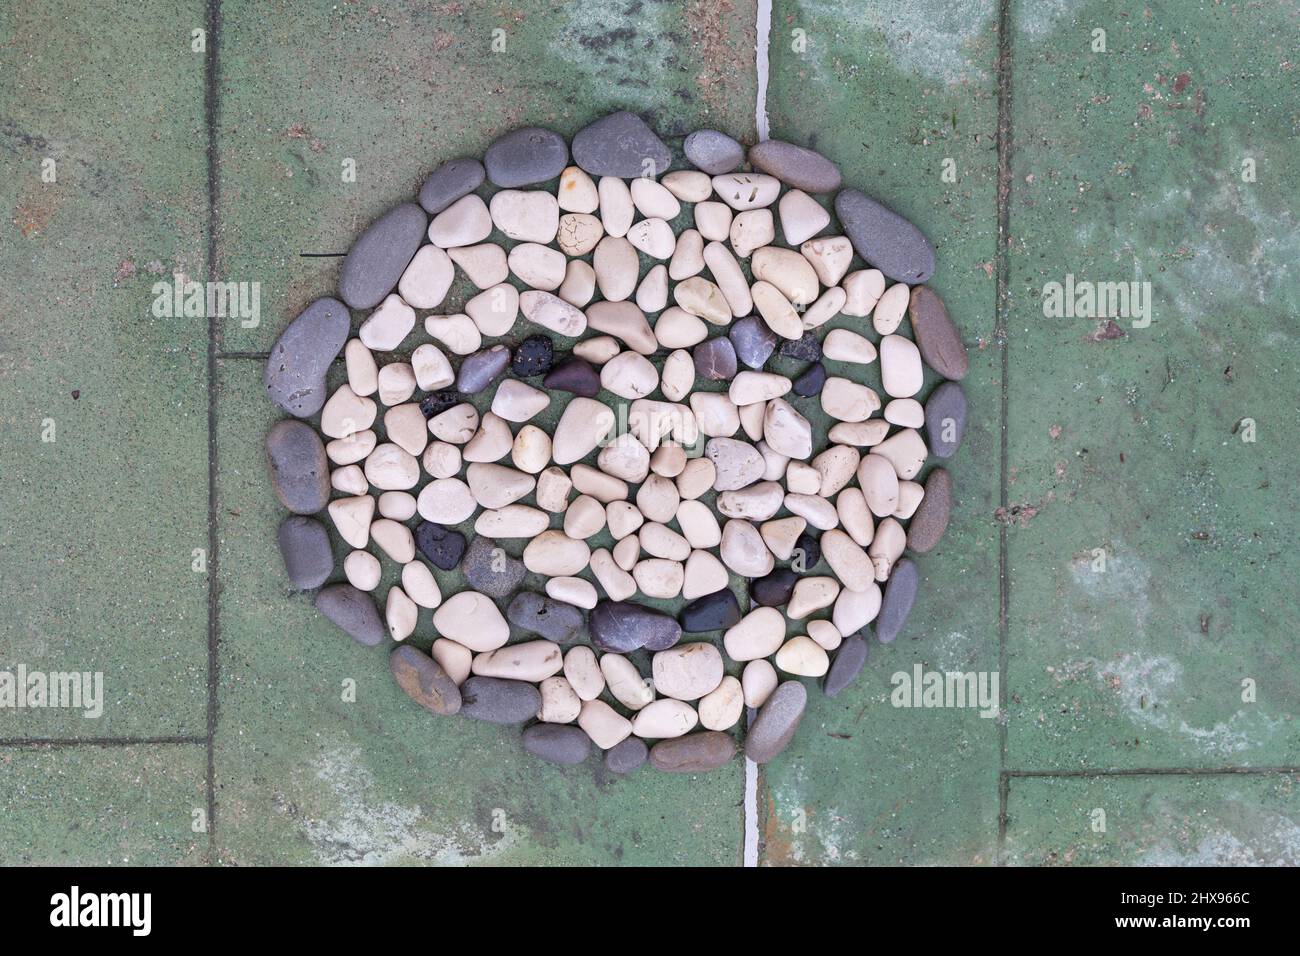 Smiley face made of stones Stock Photo